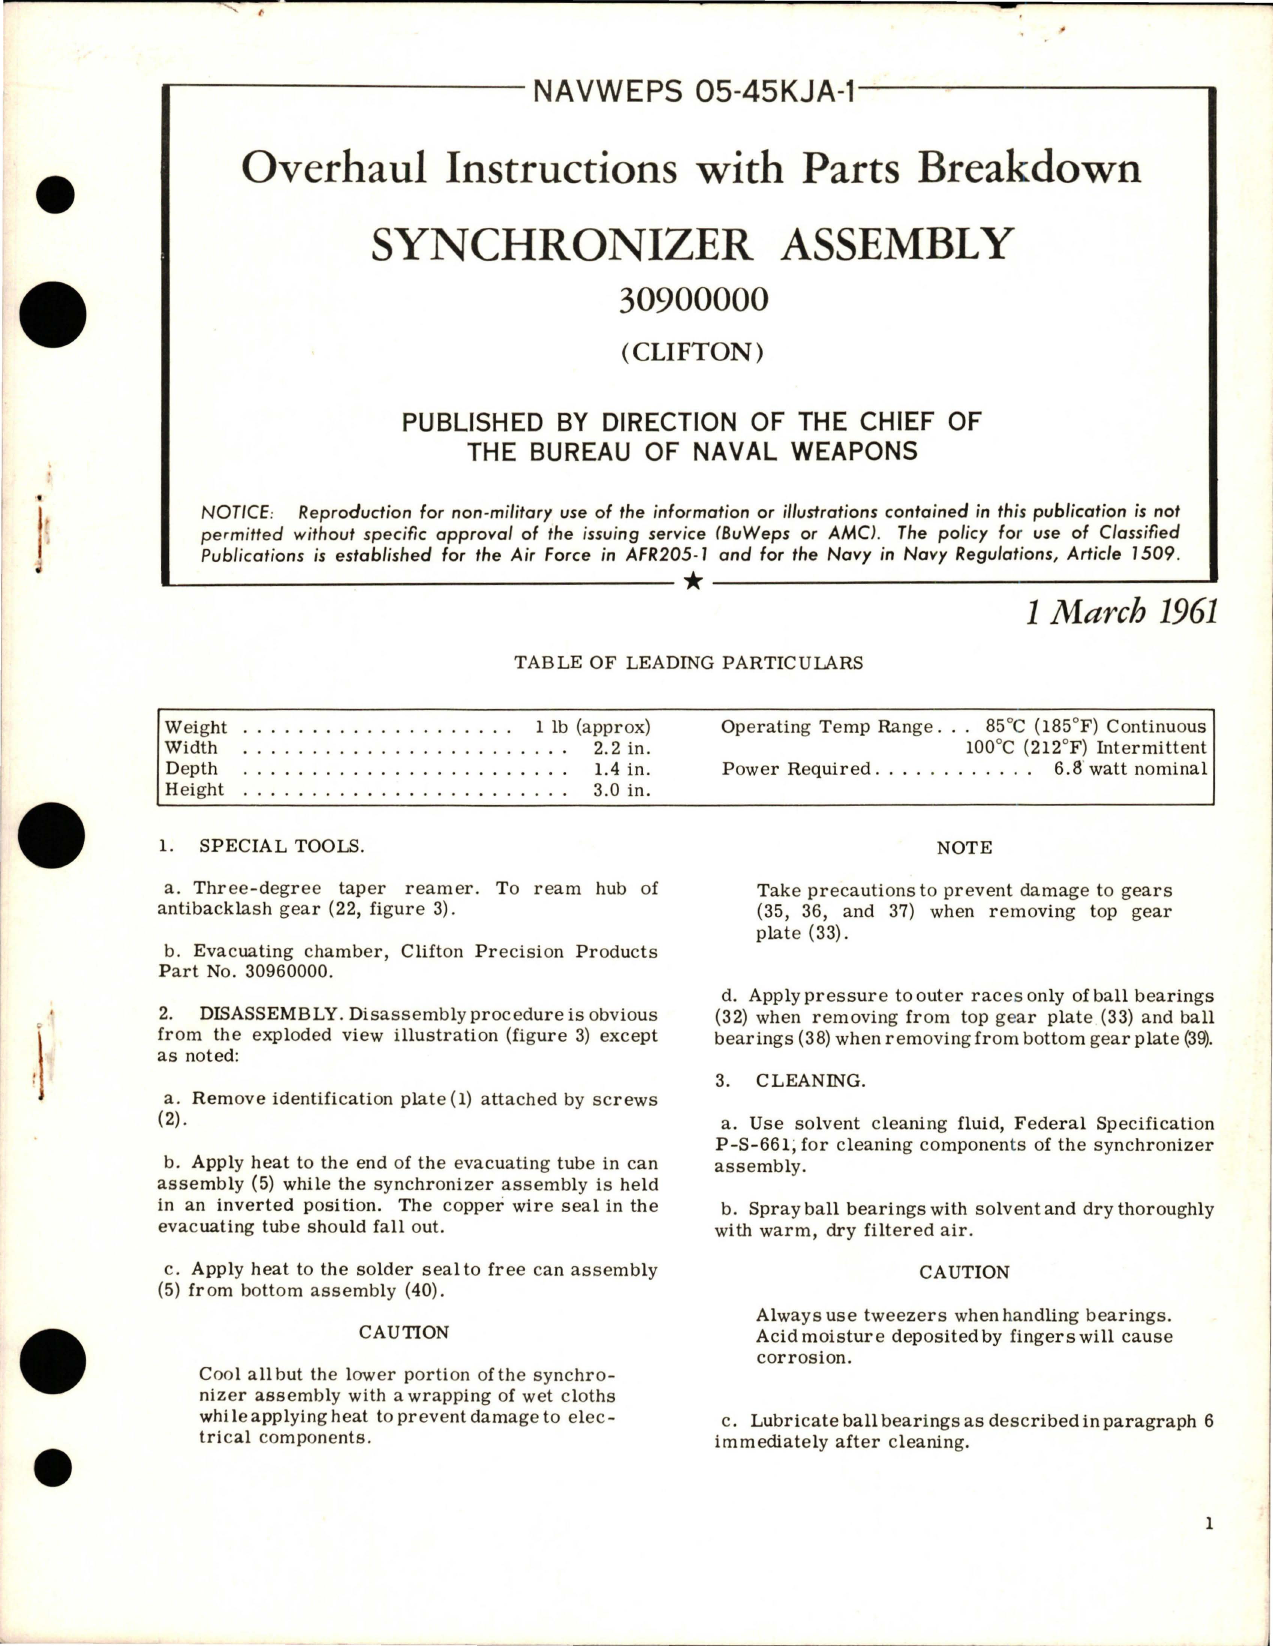 Sample page 1 from AirCorps Library document: Overhaul Instructions with Parts Breakdown for Synchronizer Assy - 30900000 